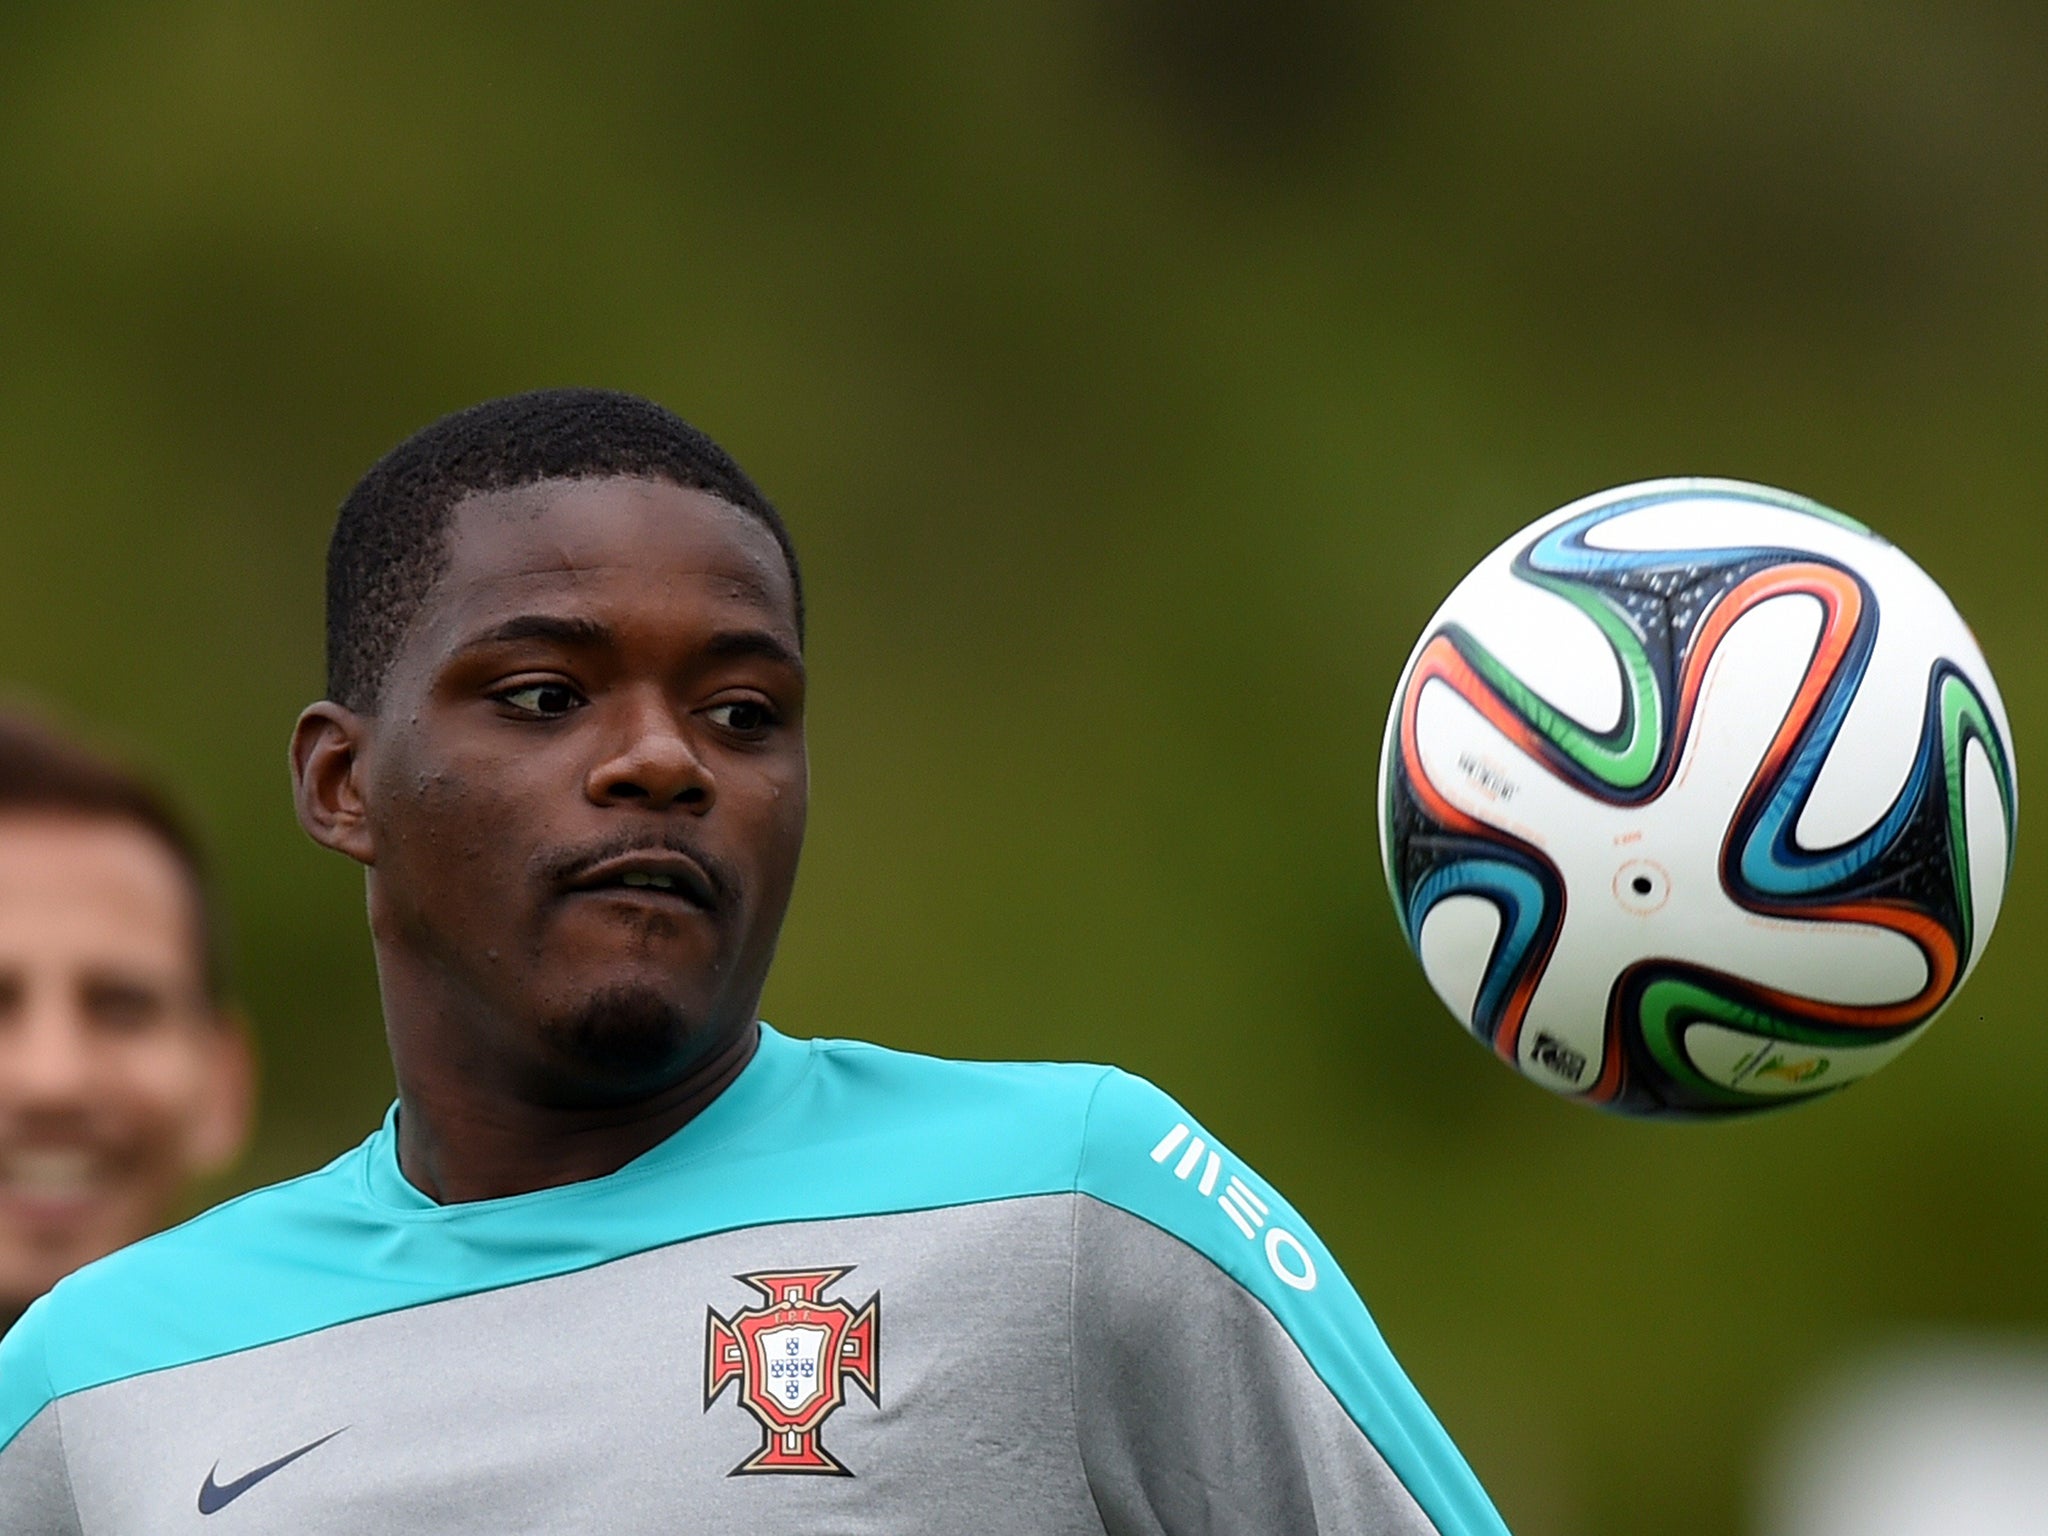 William Carvalho trains with Portugal